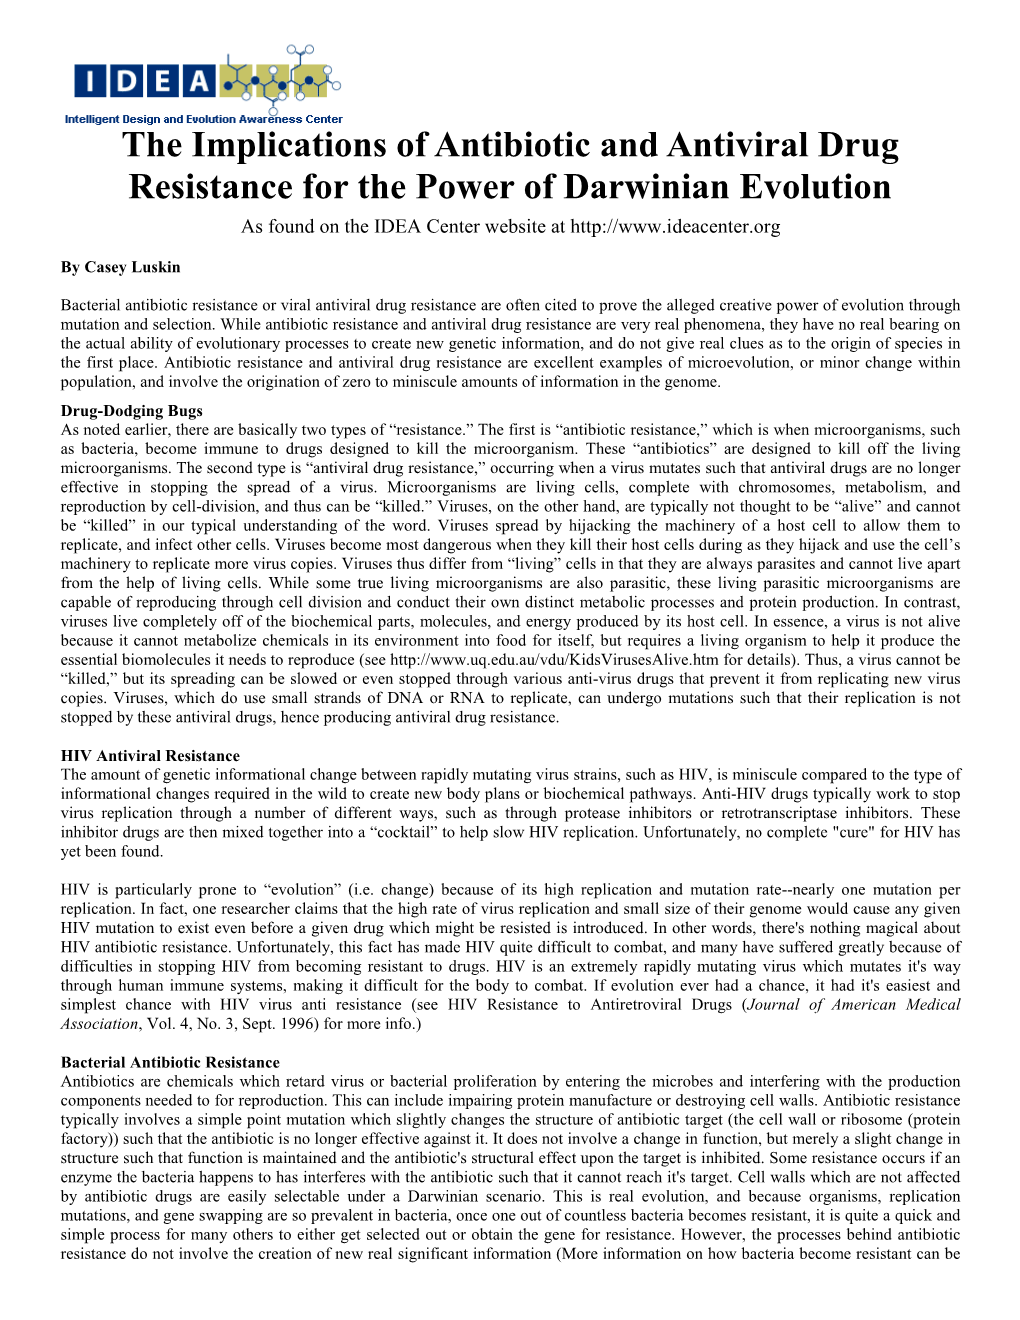 The Implications of Antibiotic and Antiviral Drug Resistance for the Power of Darwinian Evolution As Found on the IDEA Center Website At